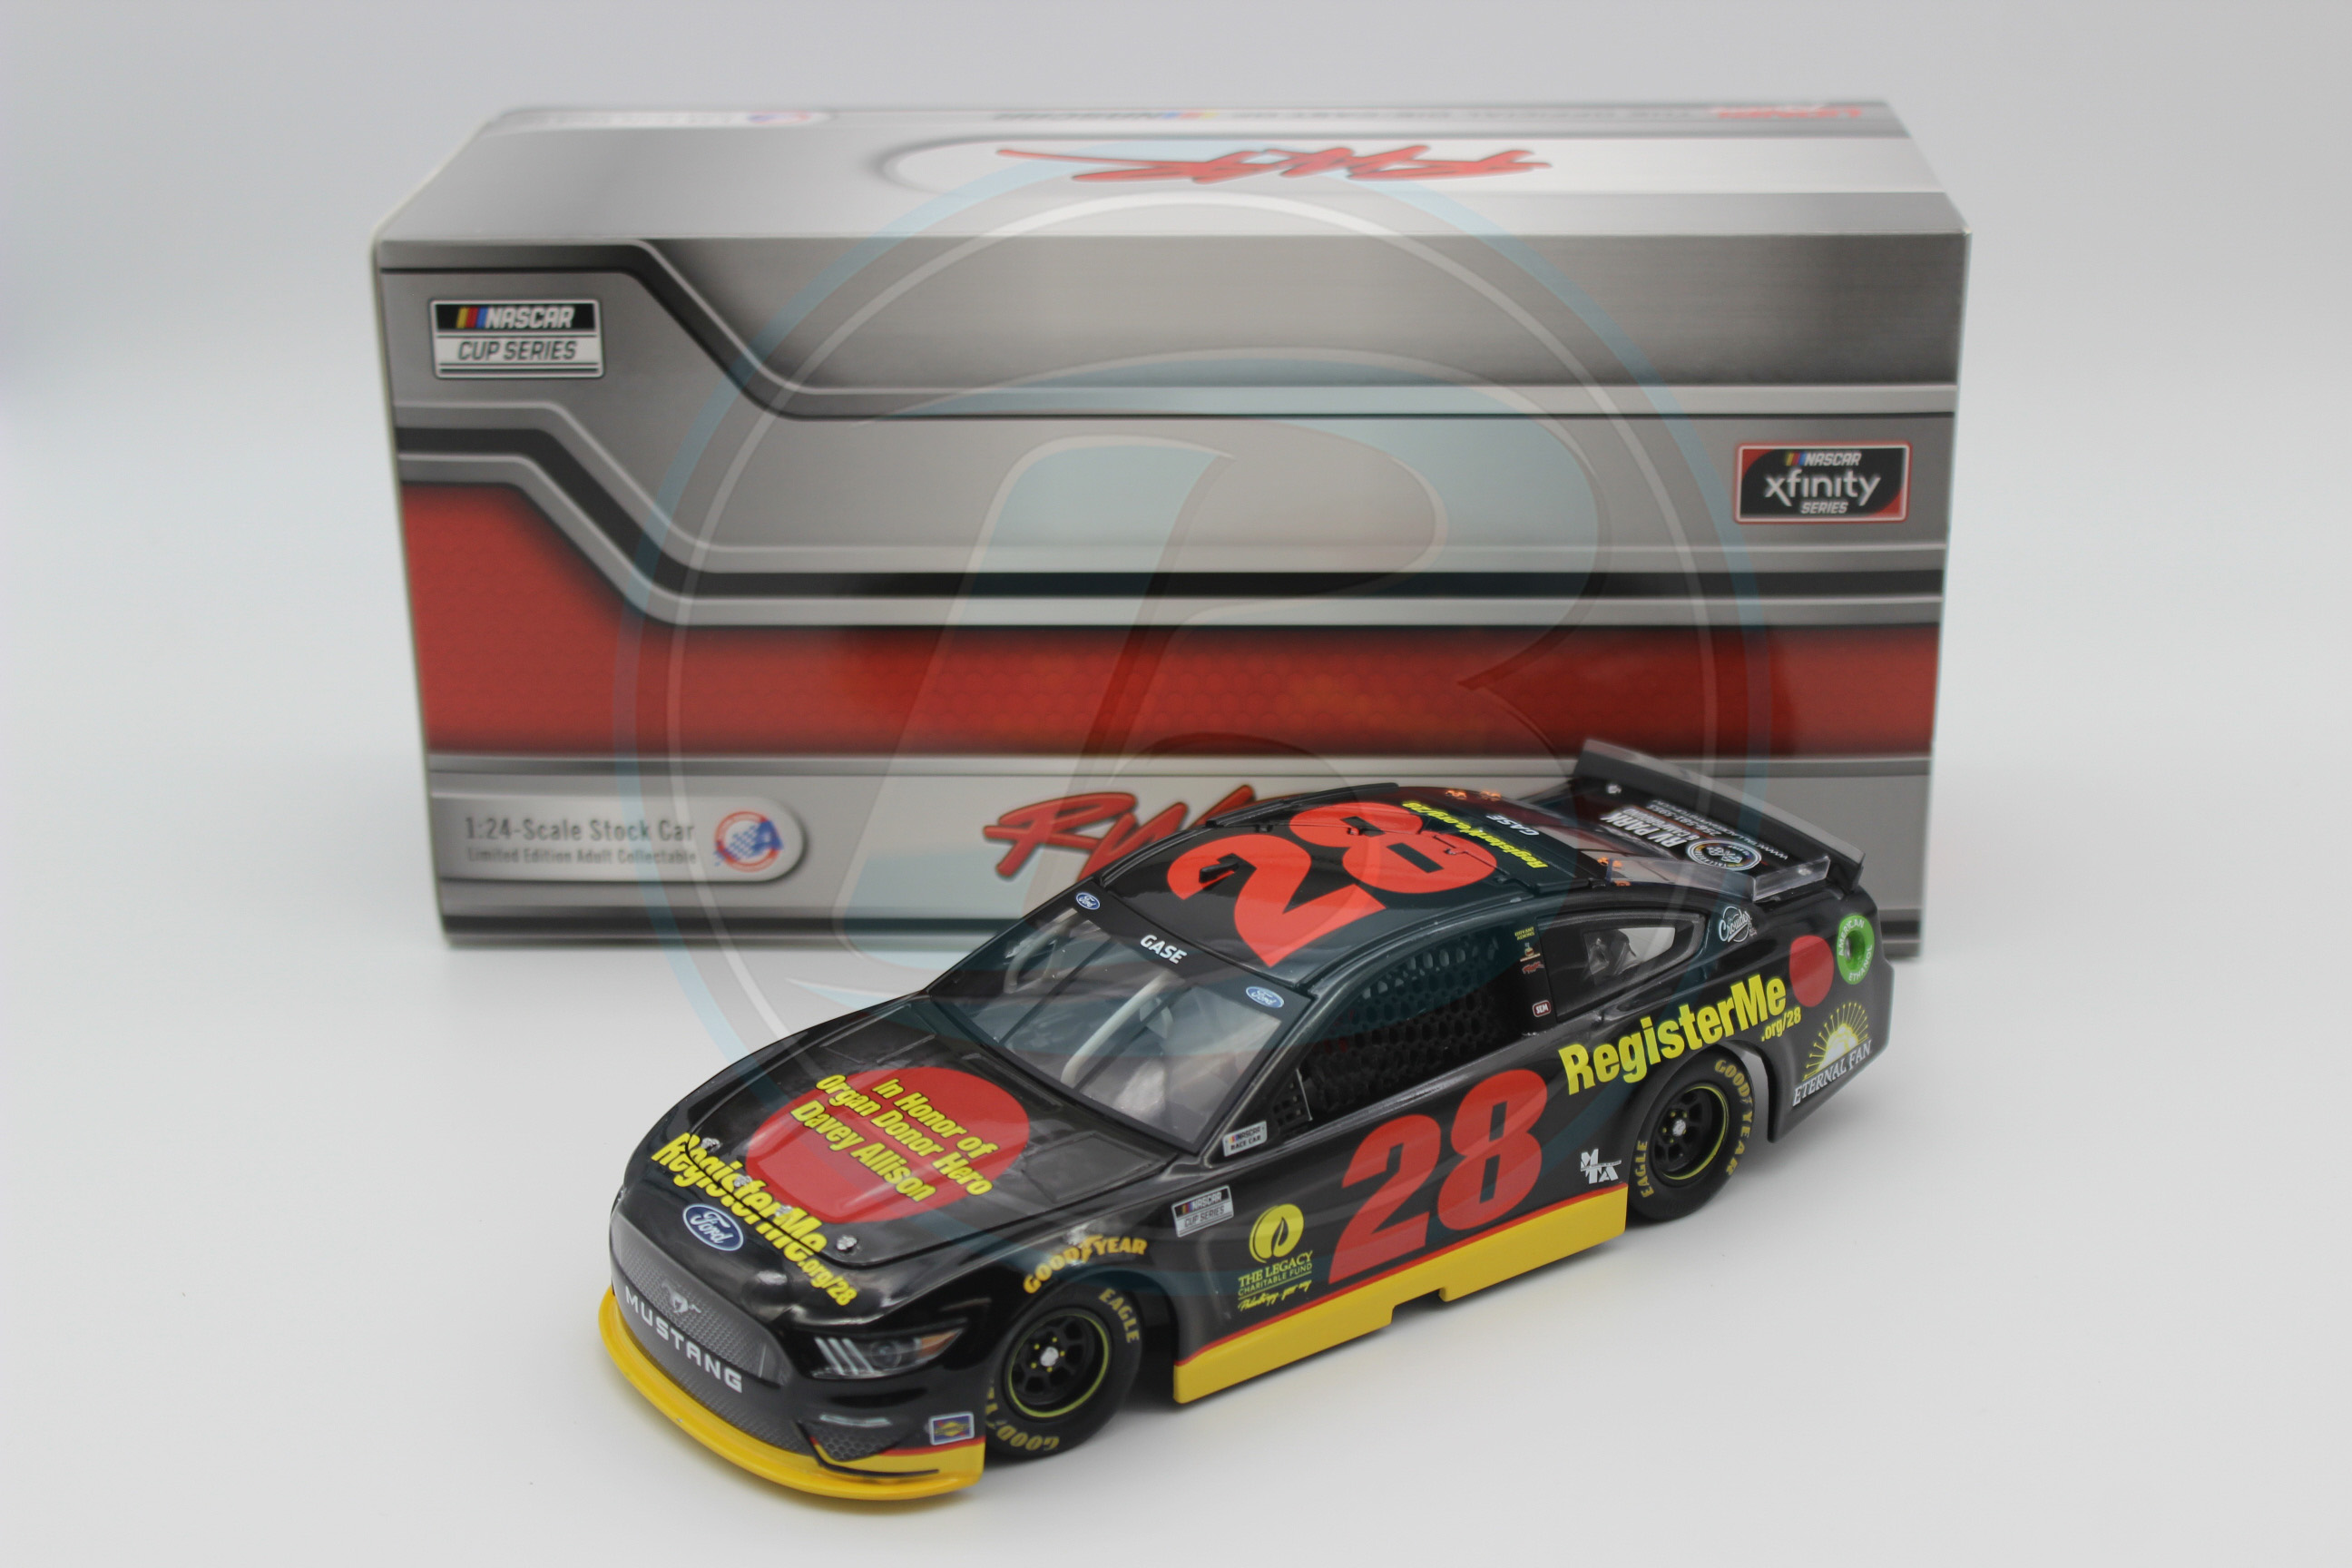 2021 Joey GASE #28 Nascar Authentics in Honor of Davey Allison 1:64 Wave 11 New 